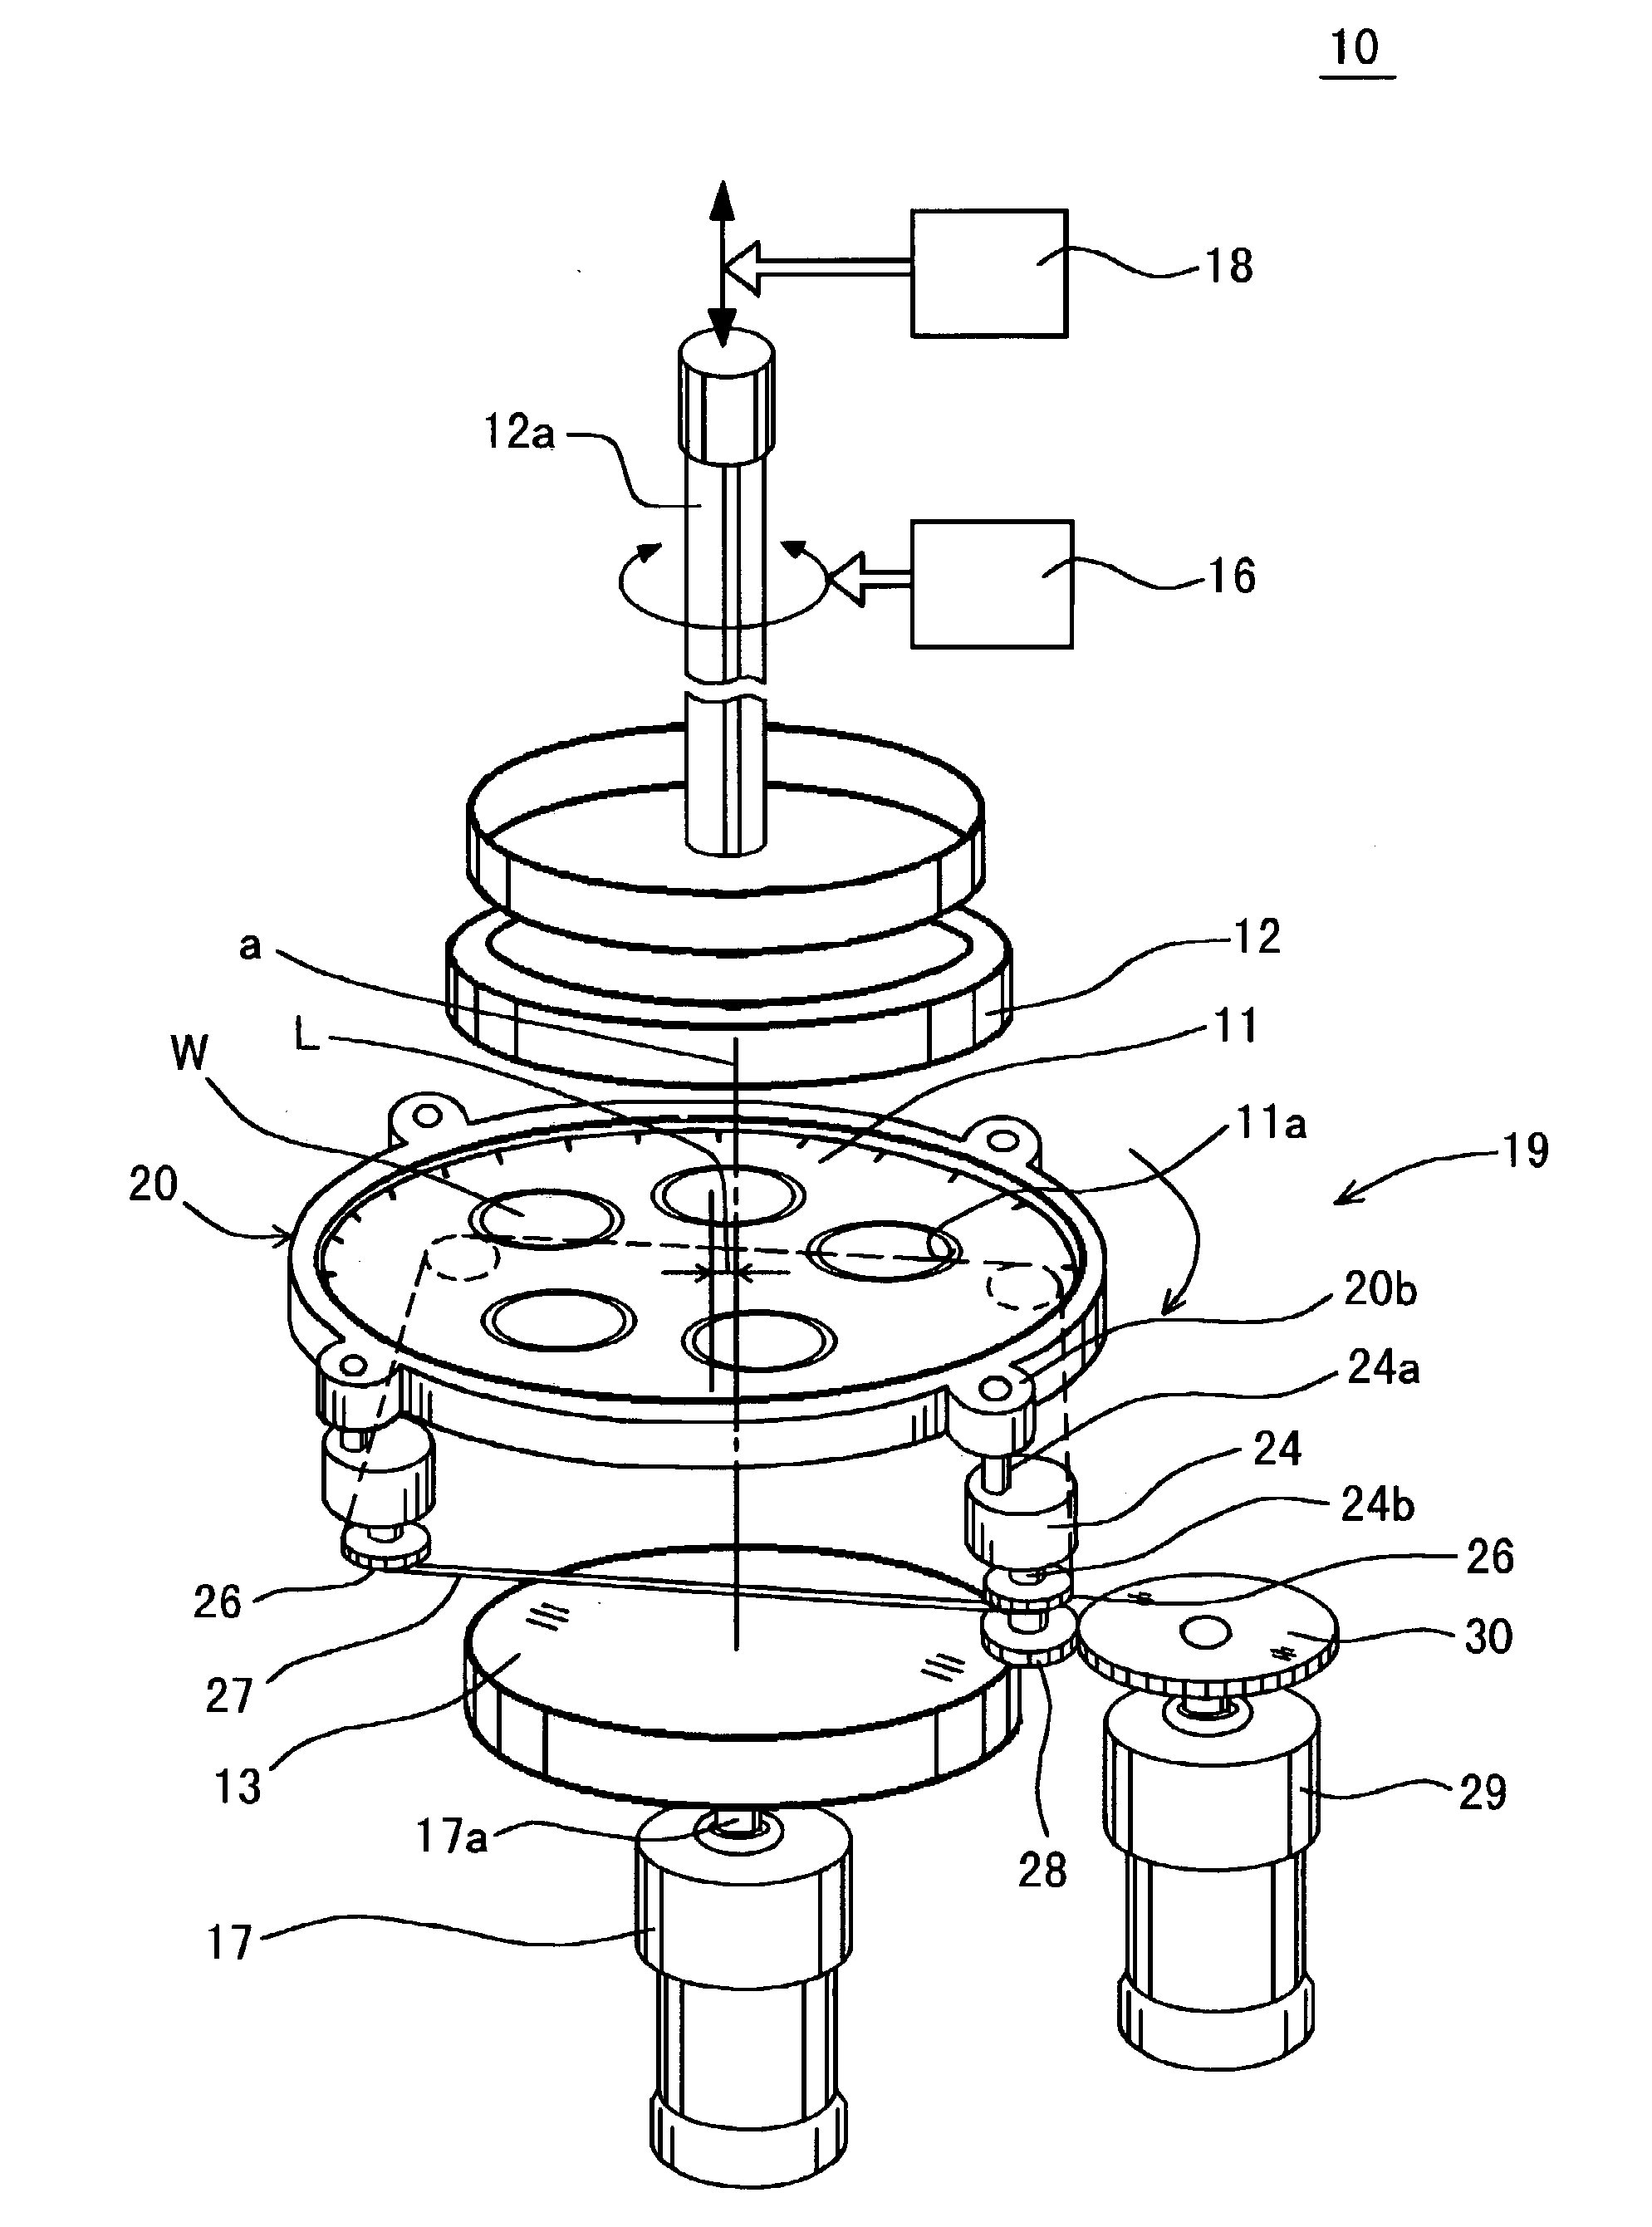 Method of polishing semiconductor wafers by using double-sided polisher